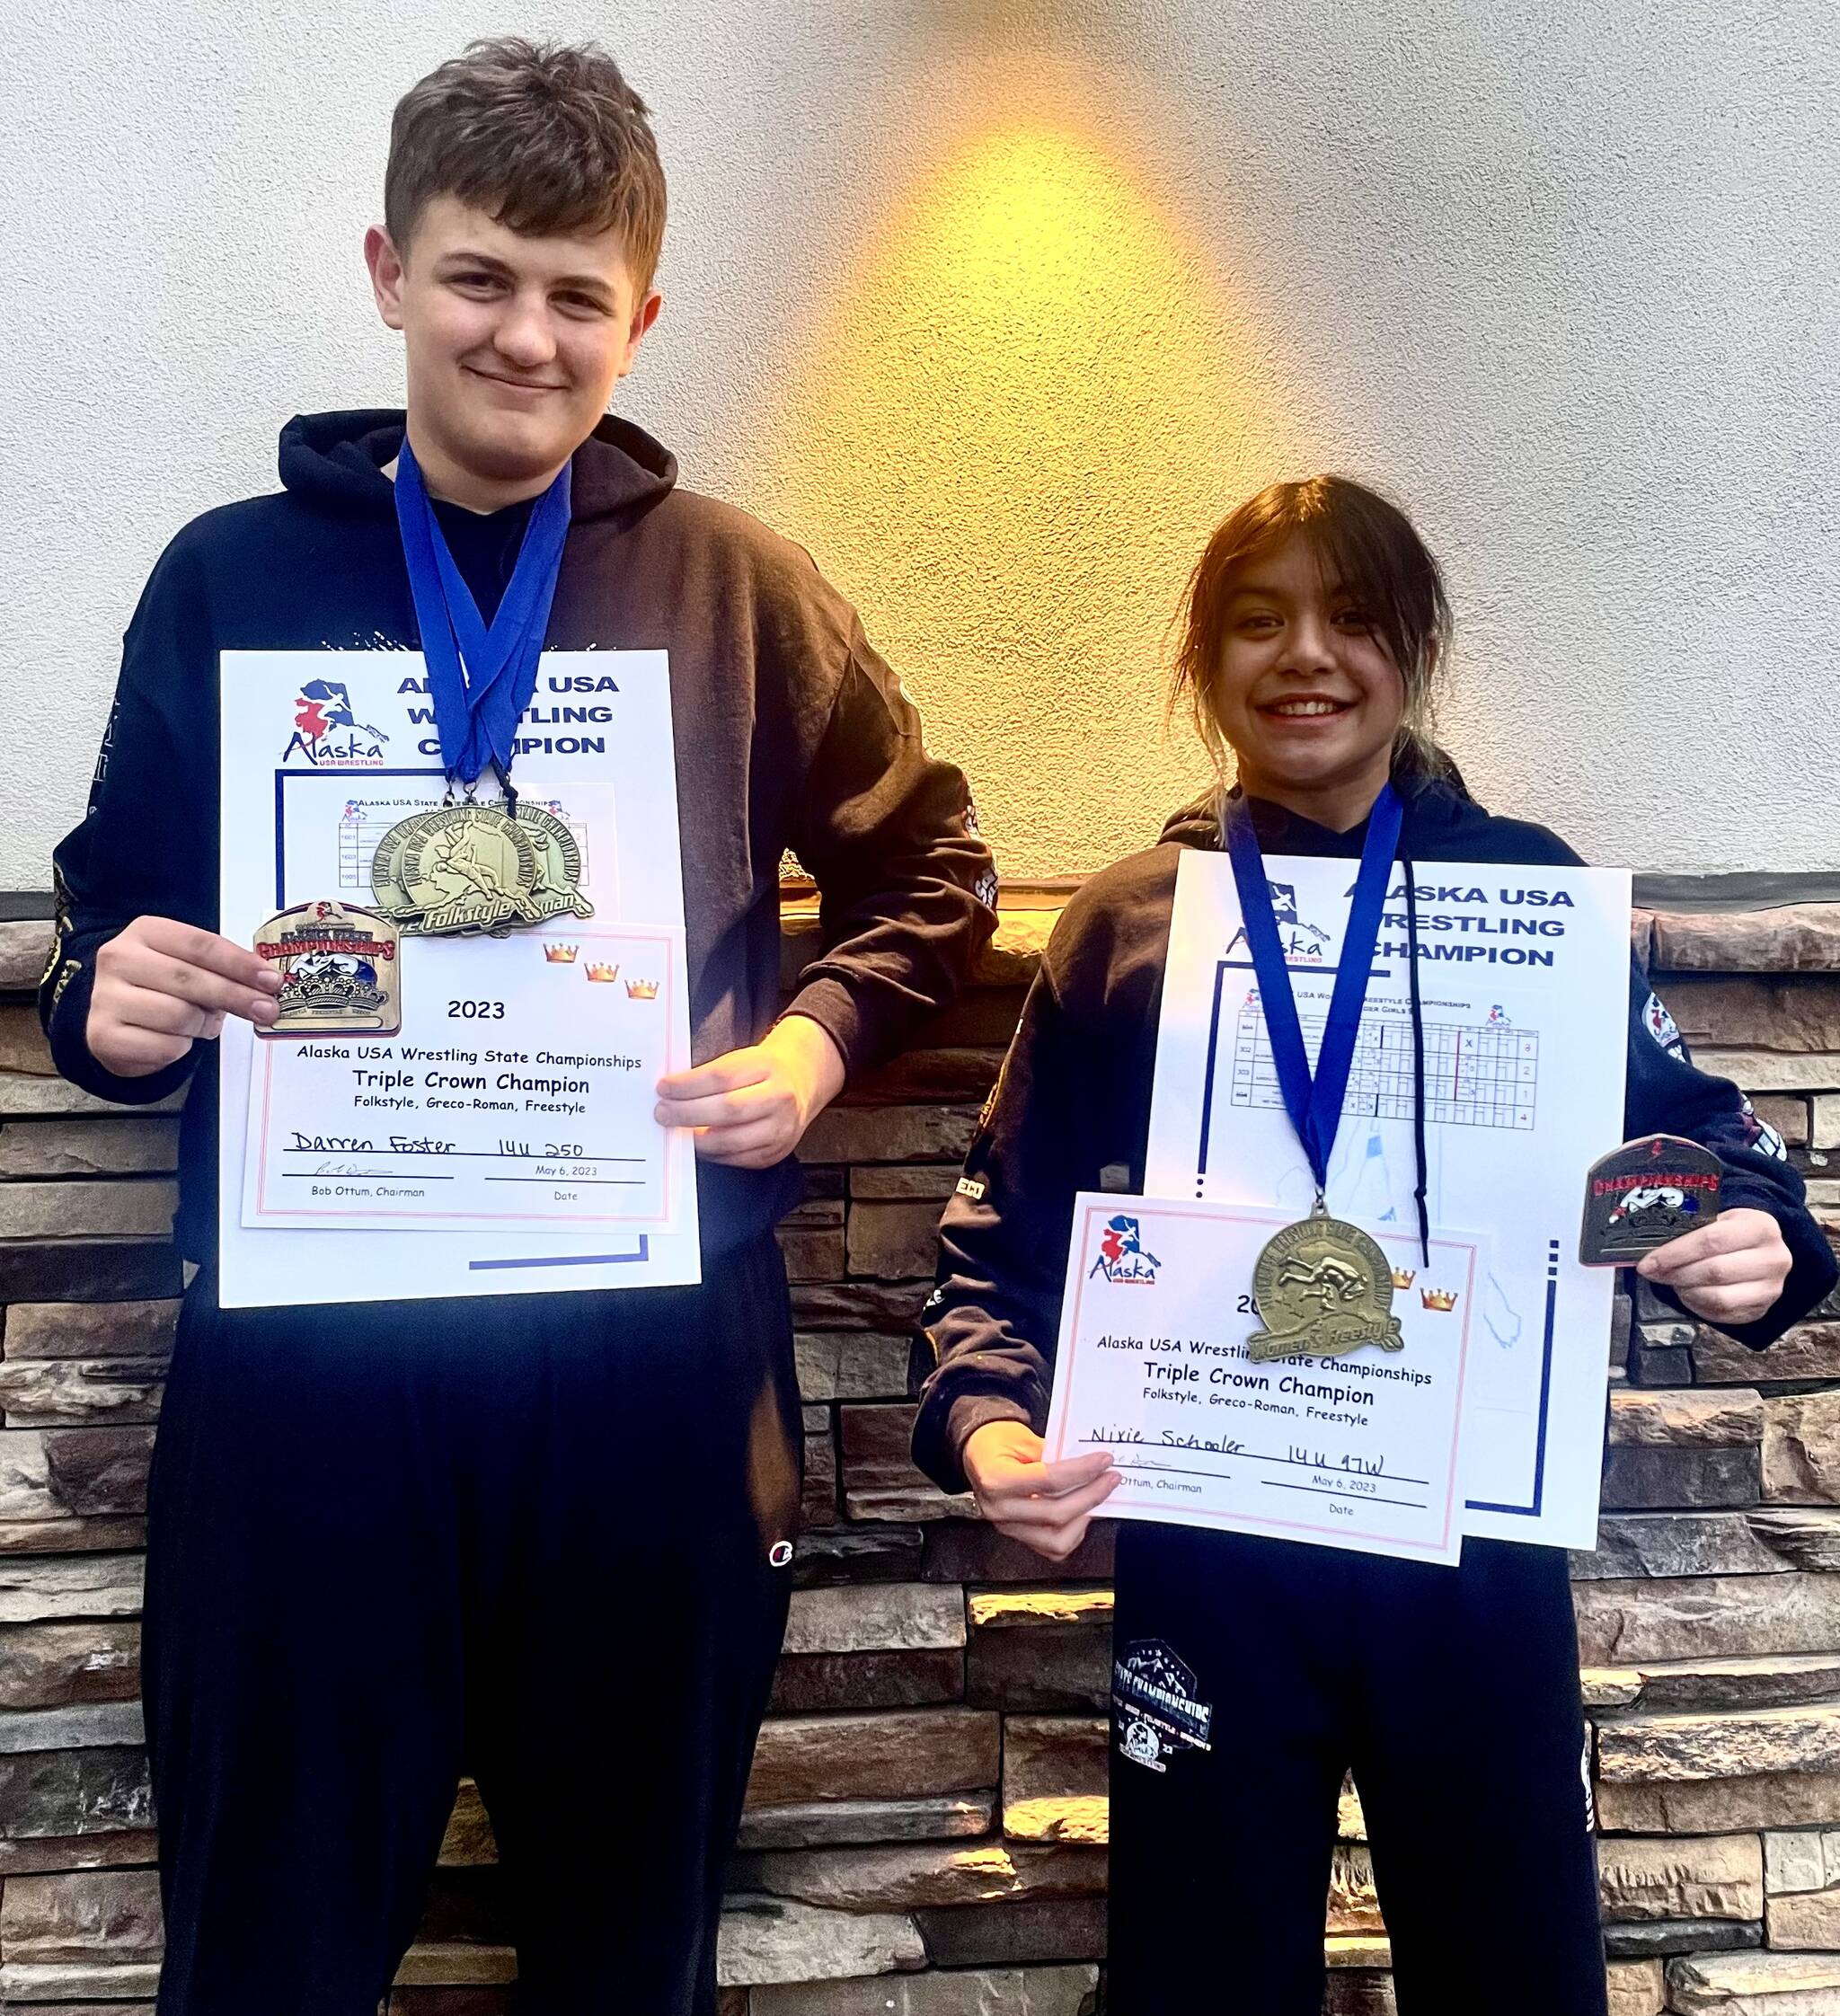 Darren Foster and Nixie Schooler with some of their gold medals and their prestigious “Triple Crown” belt buckles at the USA Wrestling Alaska State Championships at the Menard Center in Wasilla from May 3-7. (Courtesy Photo / Jason Hass)